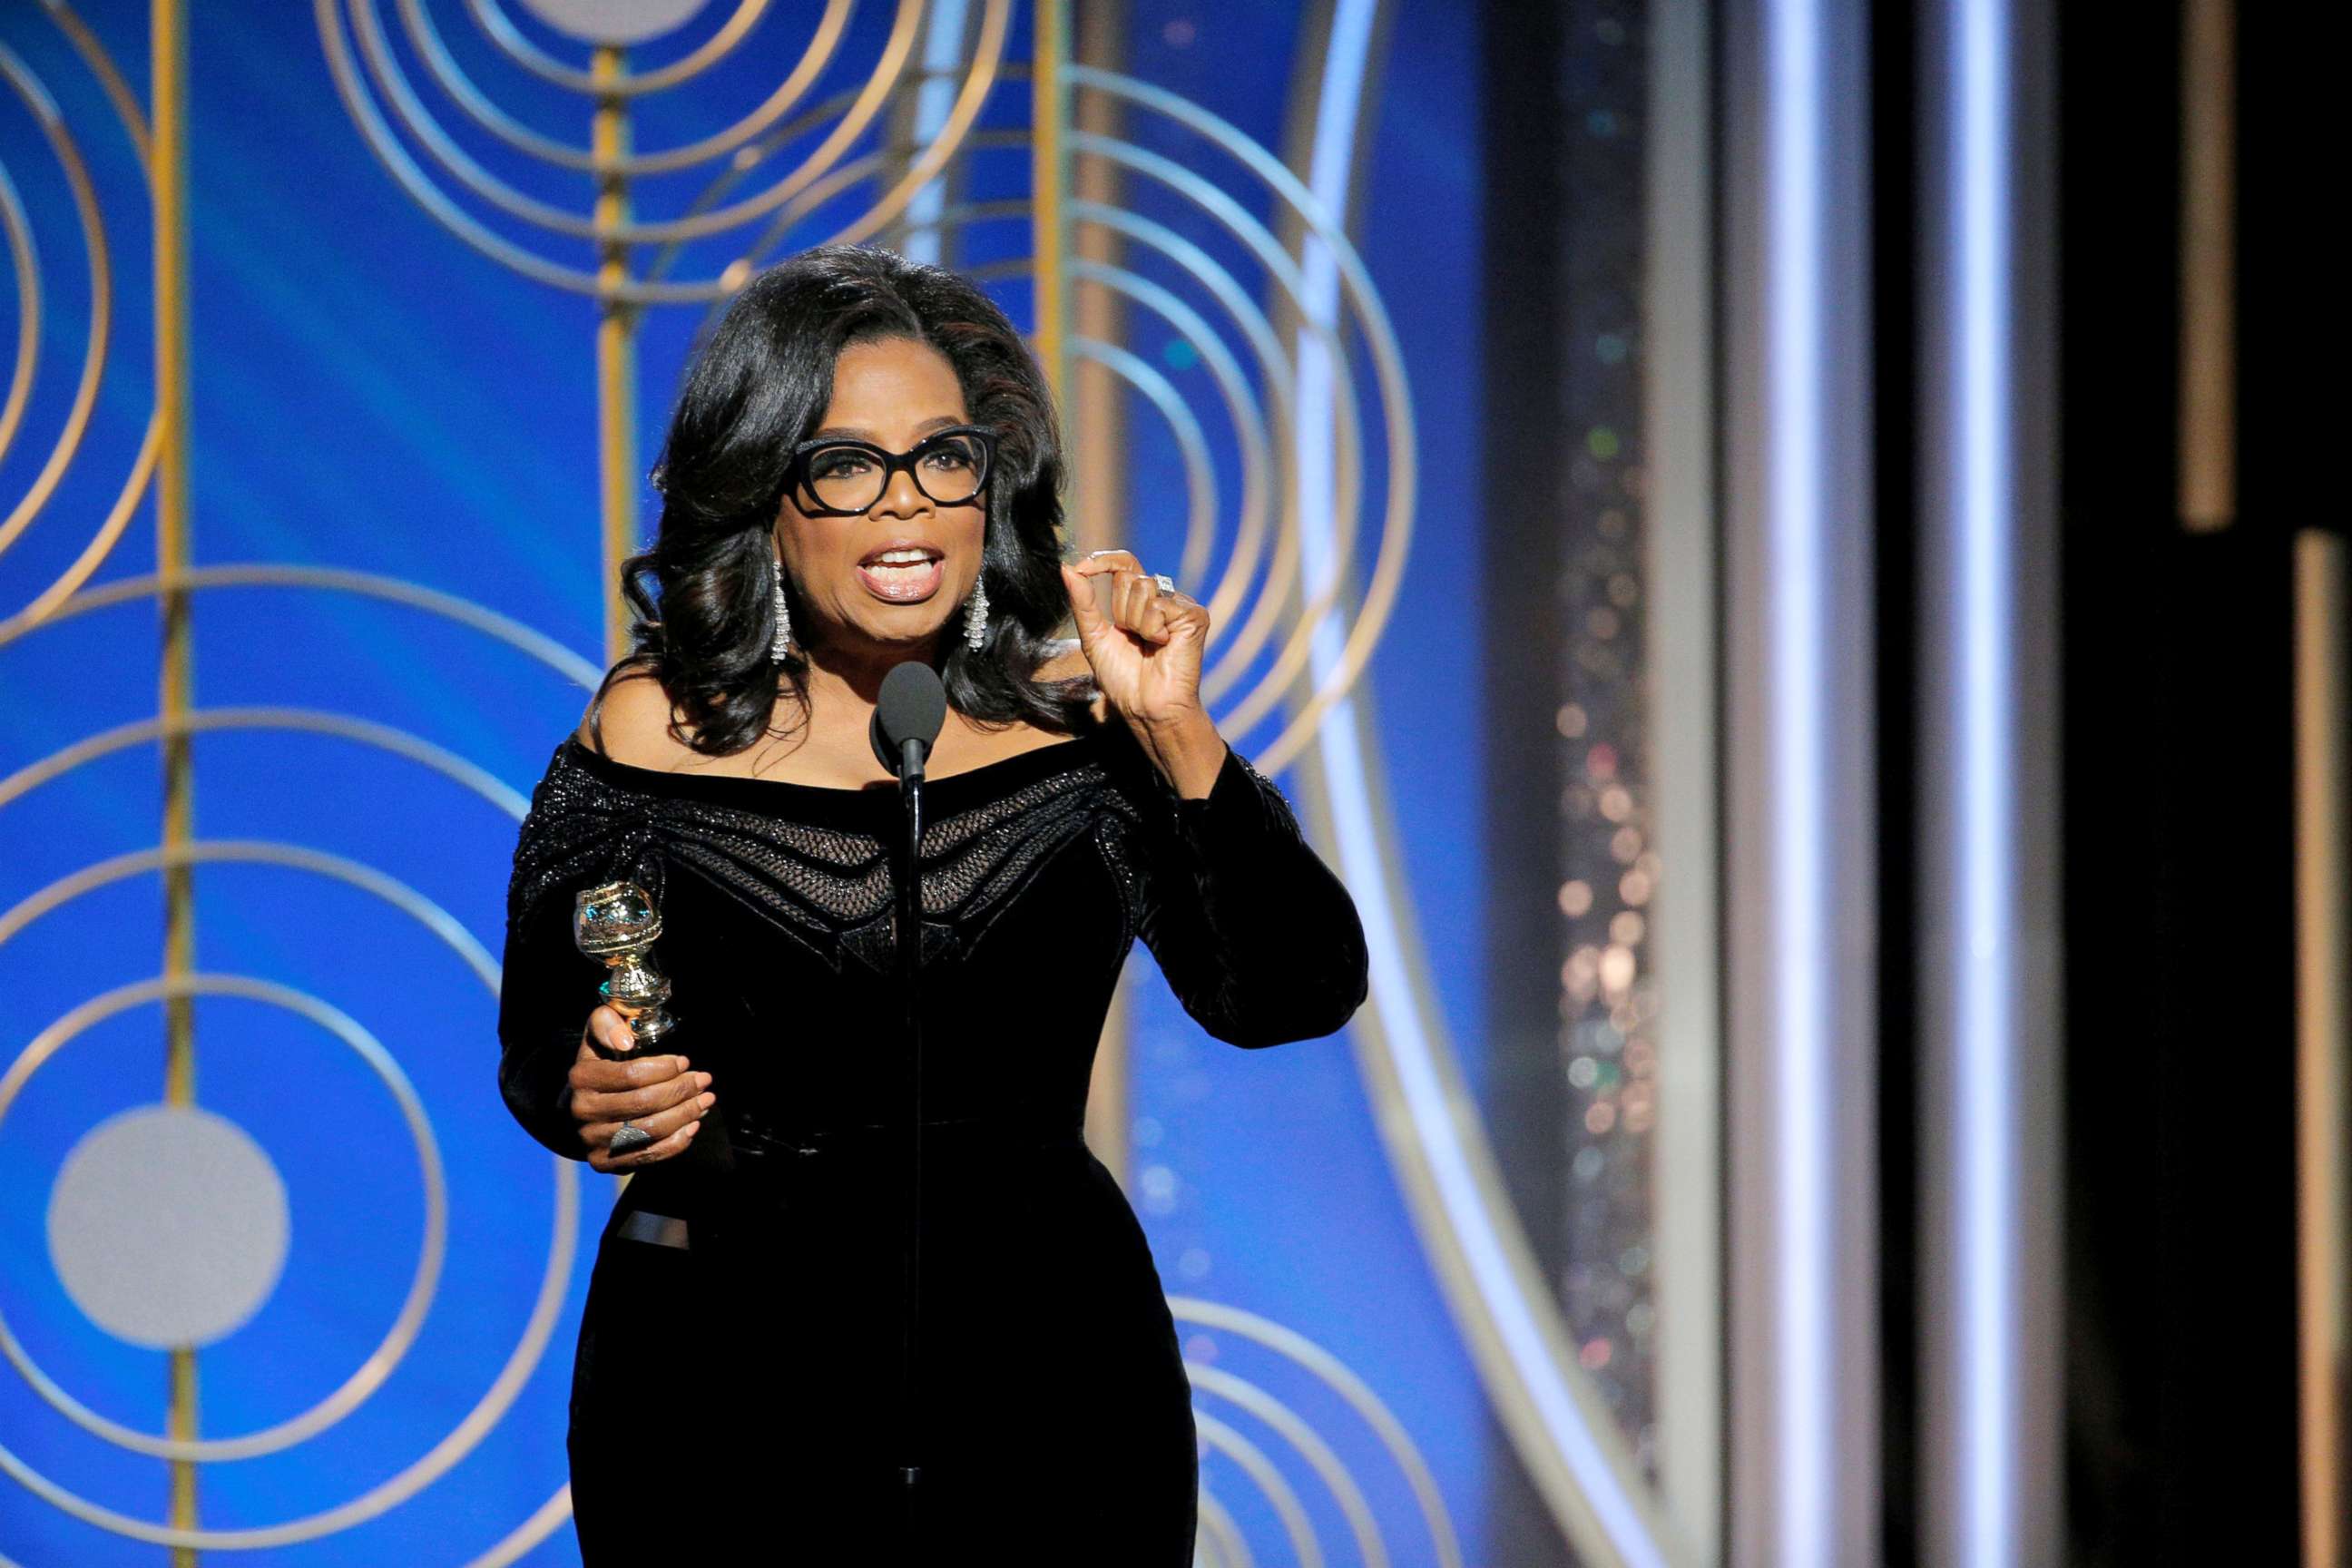 PHOTO: Oprah Winfrey speaks after accepting the Cecil B. Demille Award at the 75th Golden Globe Awards in Beverly Hills, Calif., January 7, 2018.